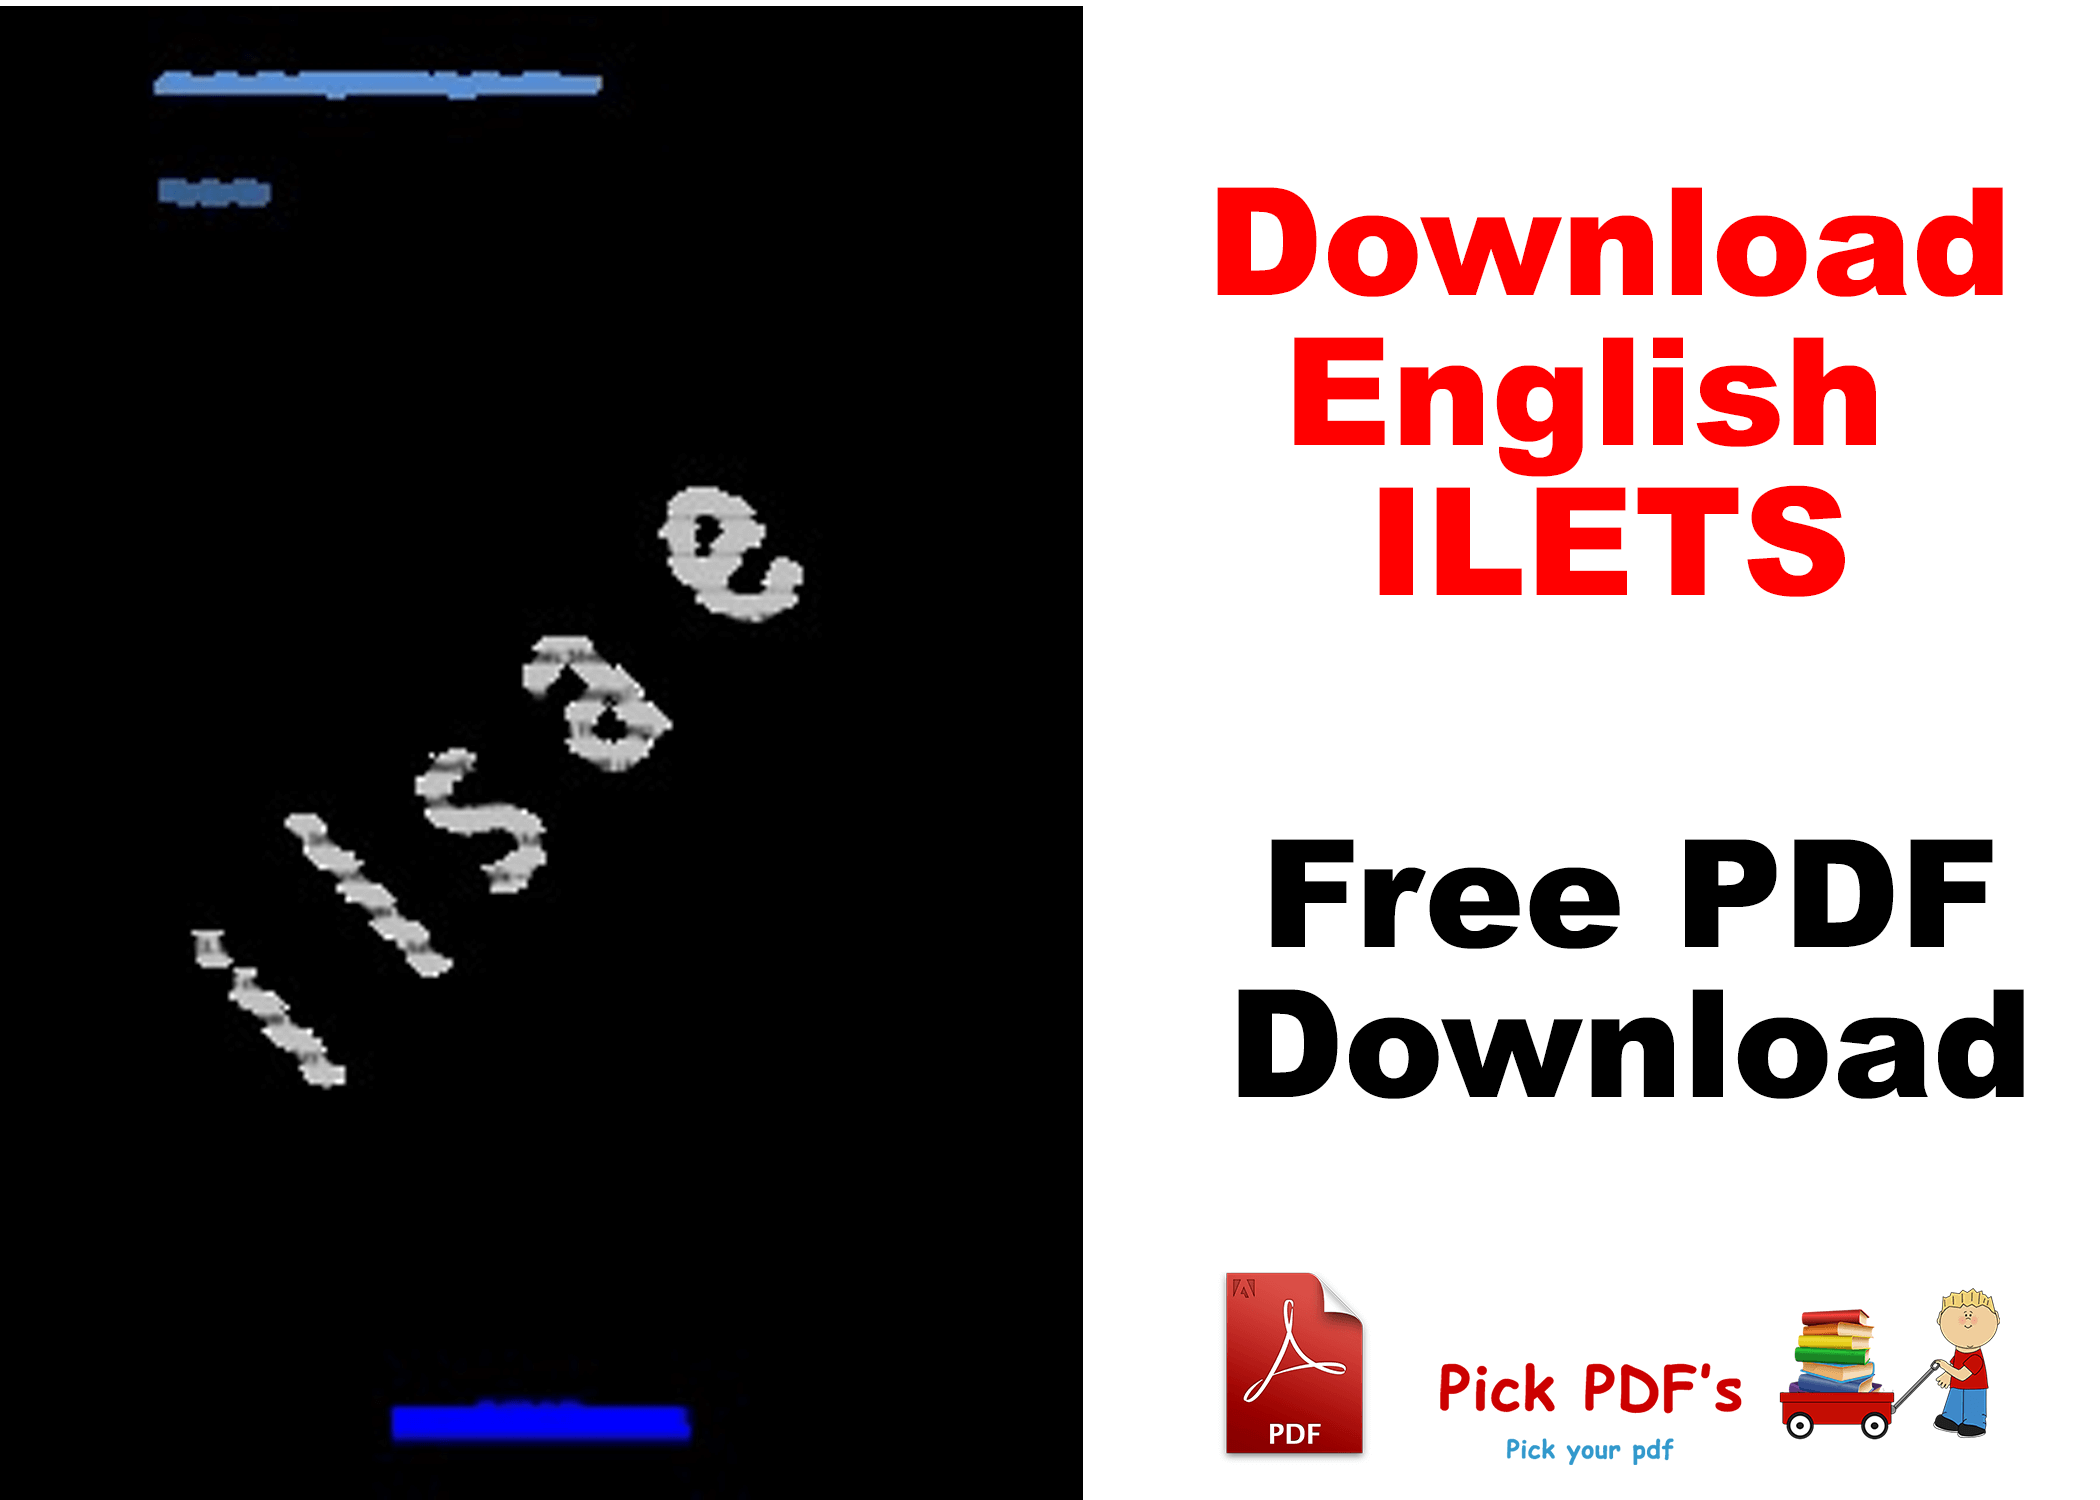 https://pickpdfs.com/prepare-for-ielts-is-a-book-of-practice-ielts-exams10-download-free-pdf/